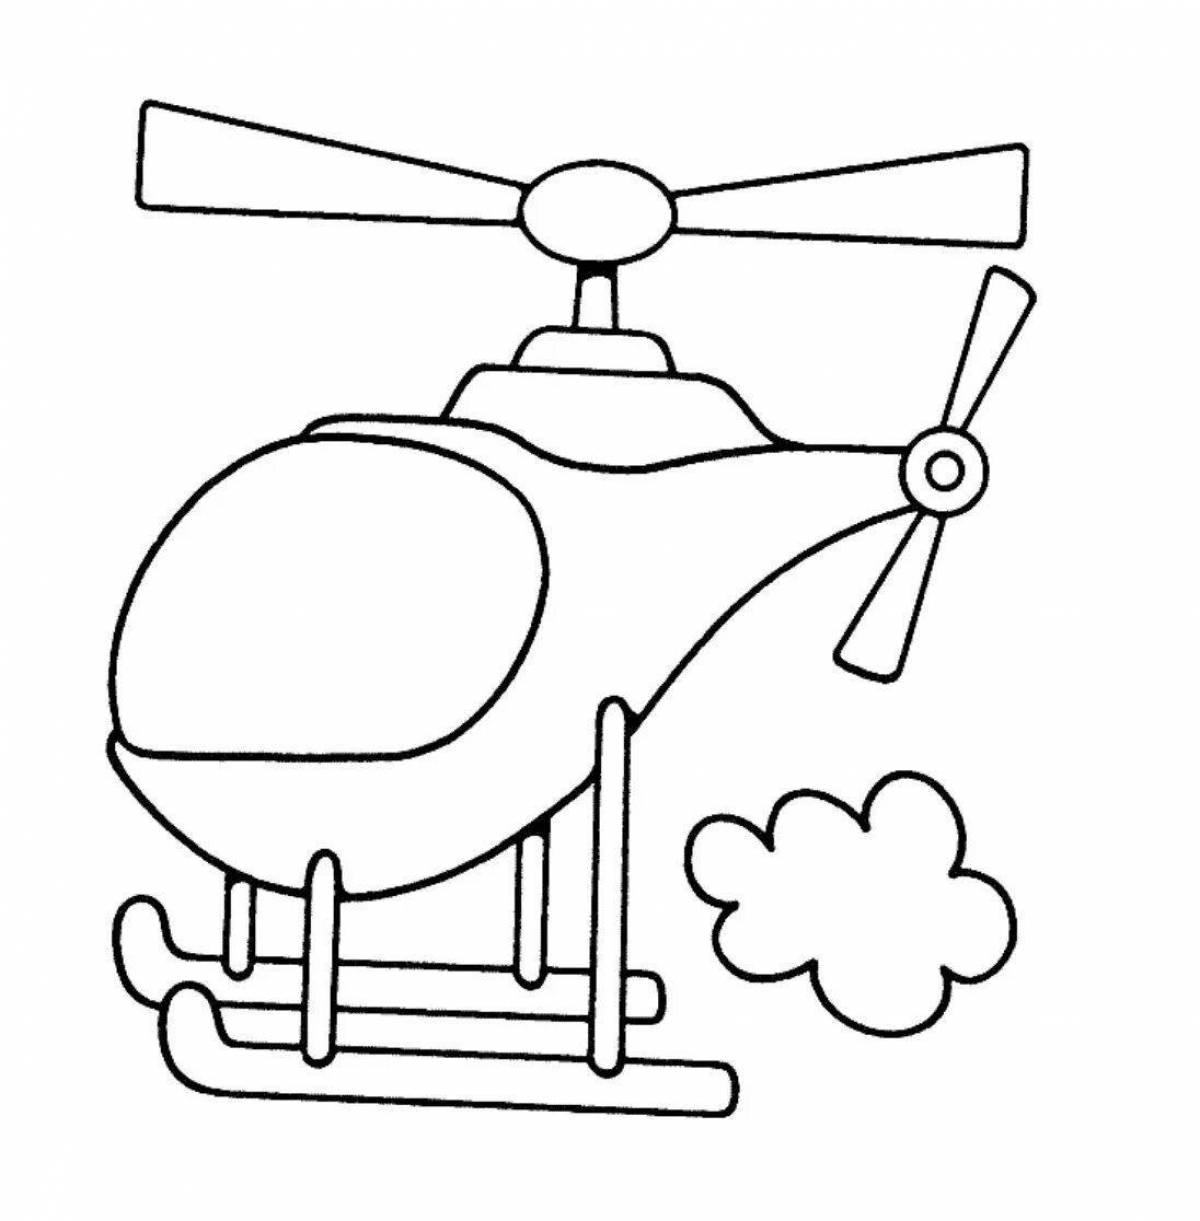 Cute transportation coloring page